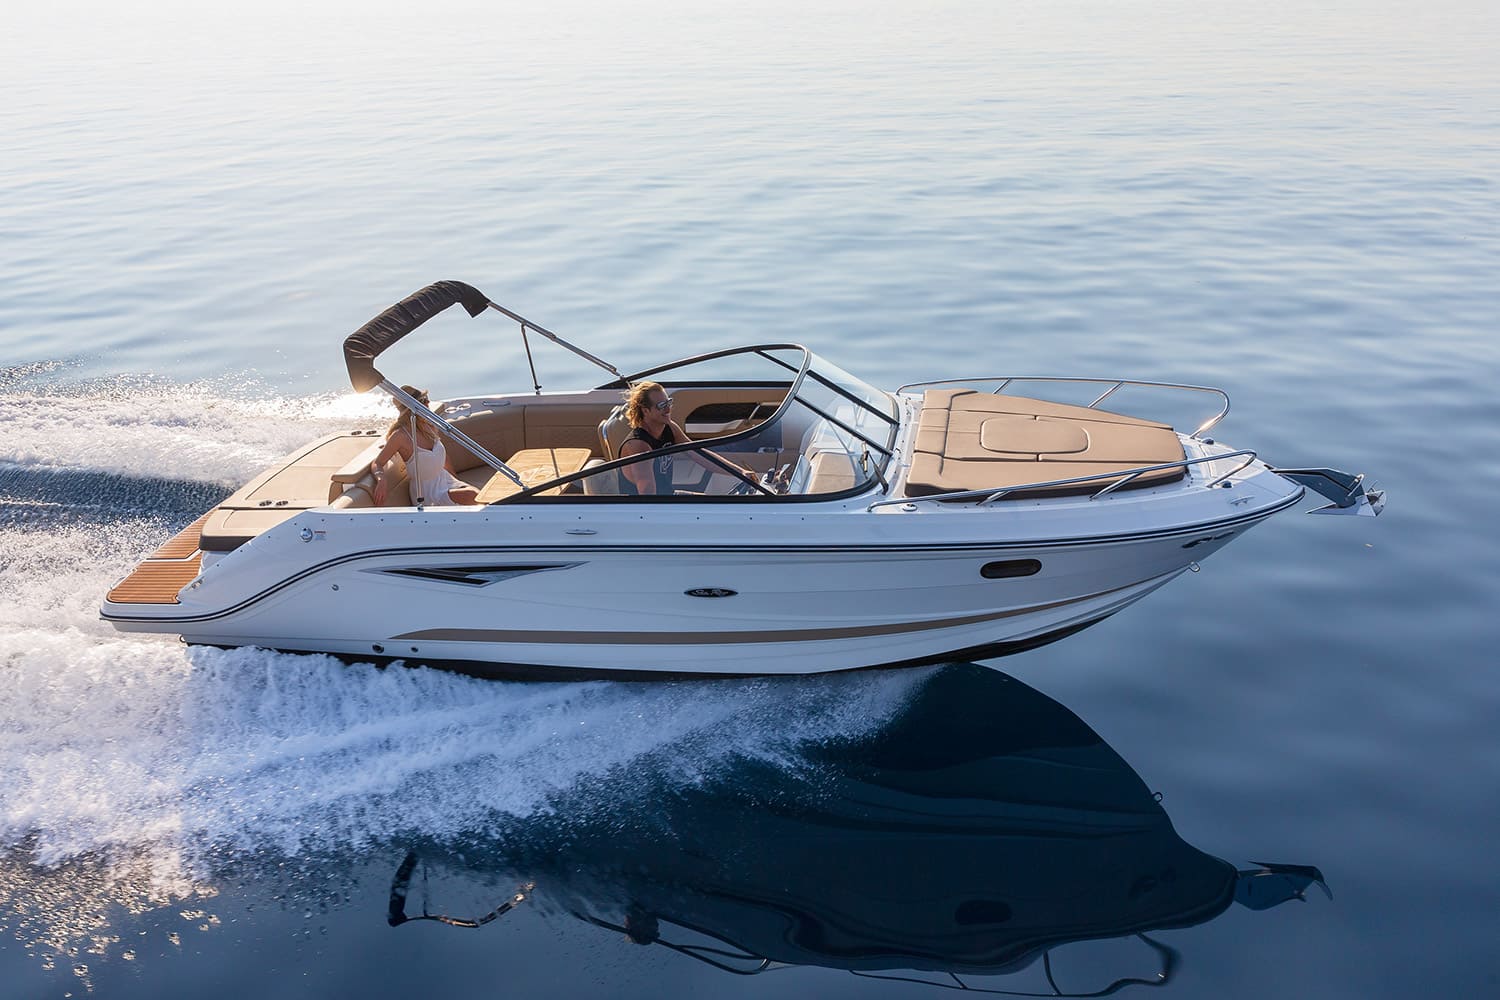 The new Sea Ray SunSport 250 is ready for immediate delivery.